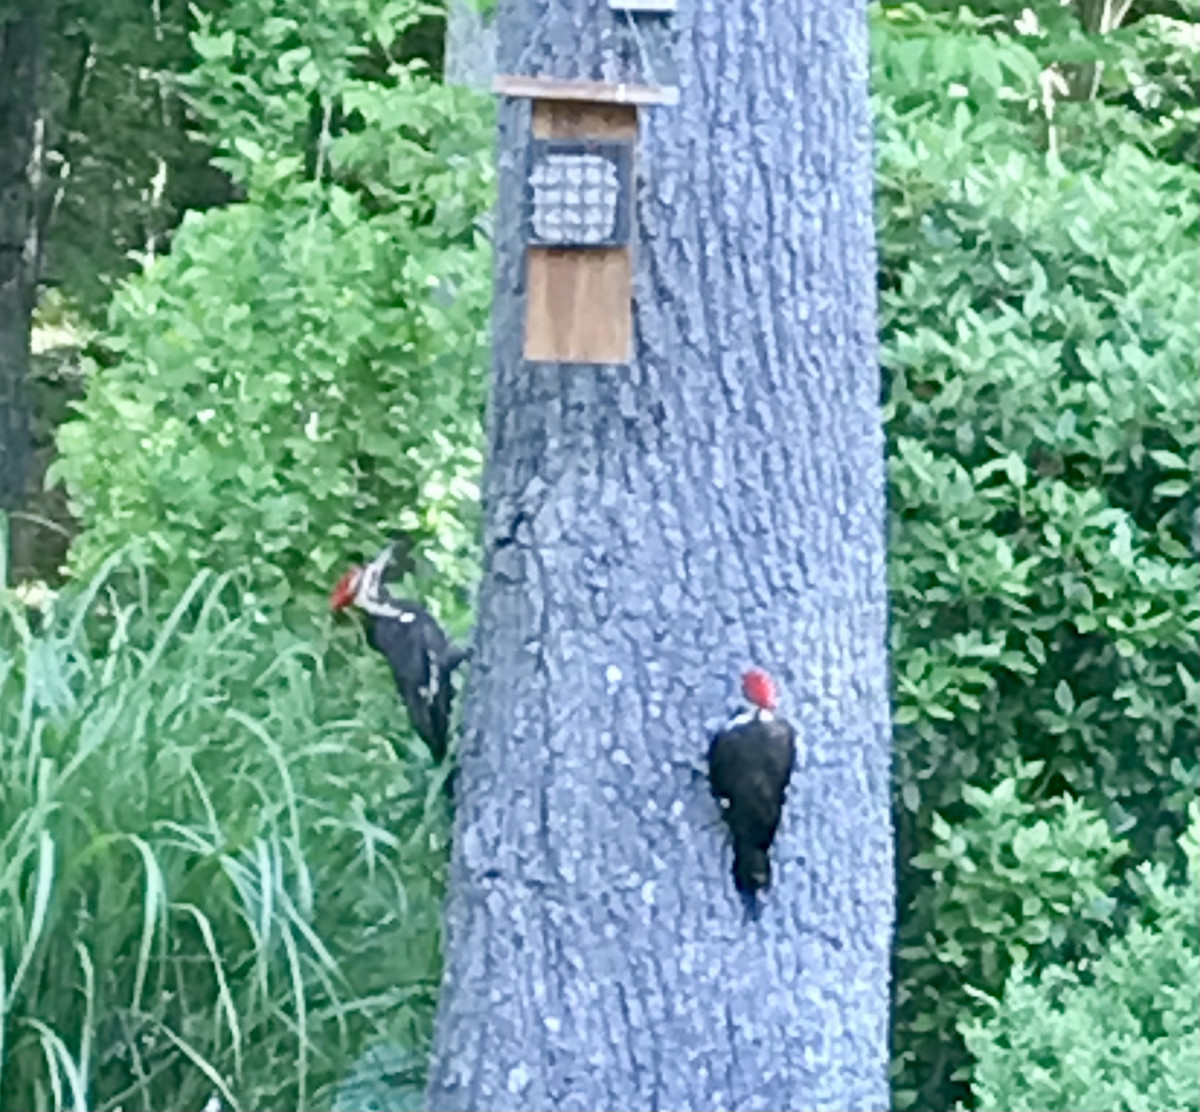 A pair of Pileated woodpeckers visit our suet feeder. A variety of native plants, bird feeders and  birdhouses invites the locals into our backyard.